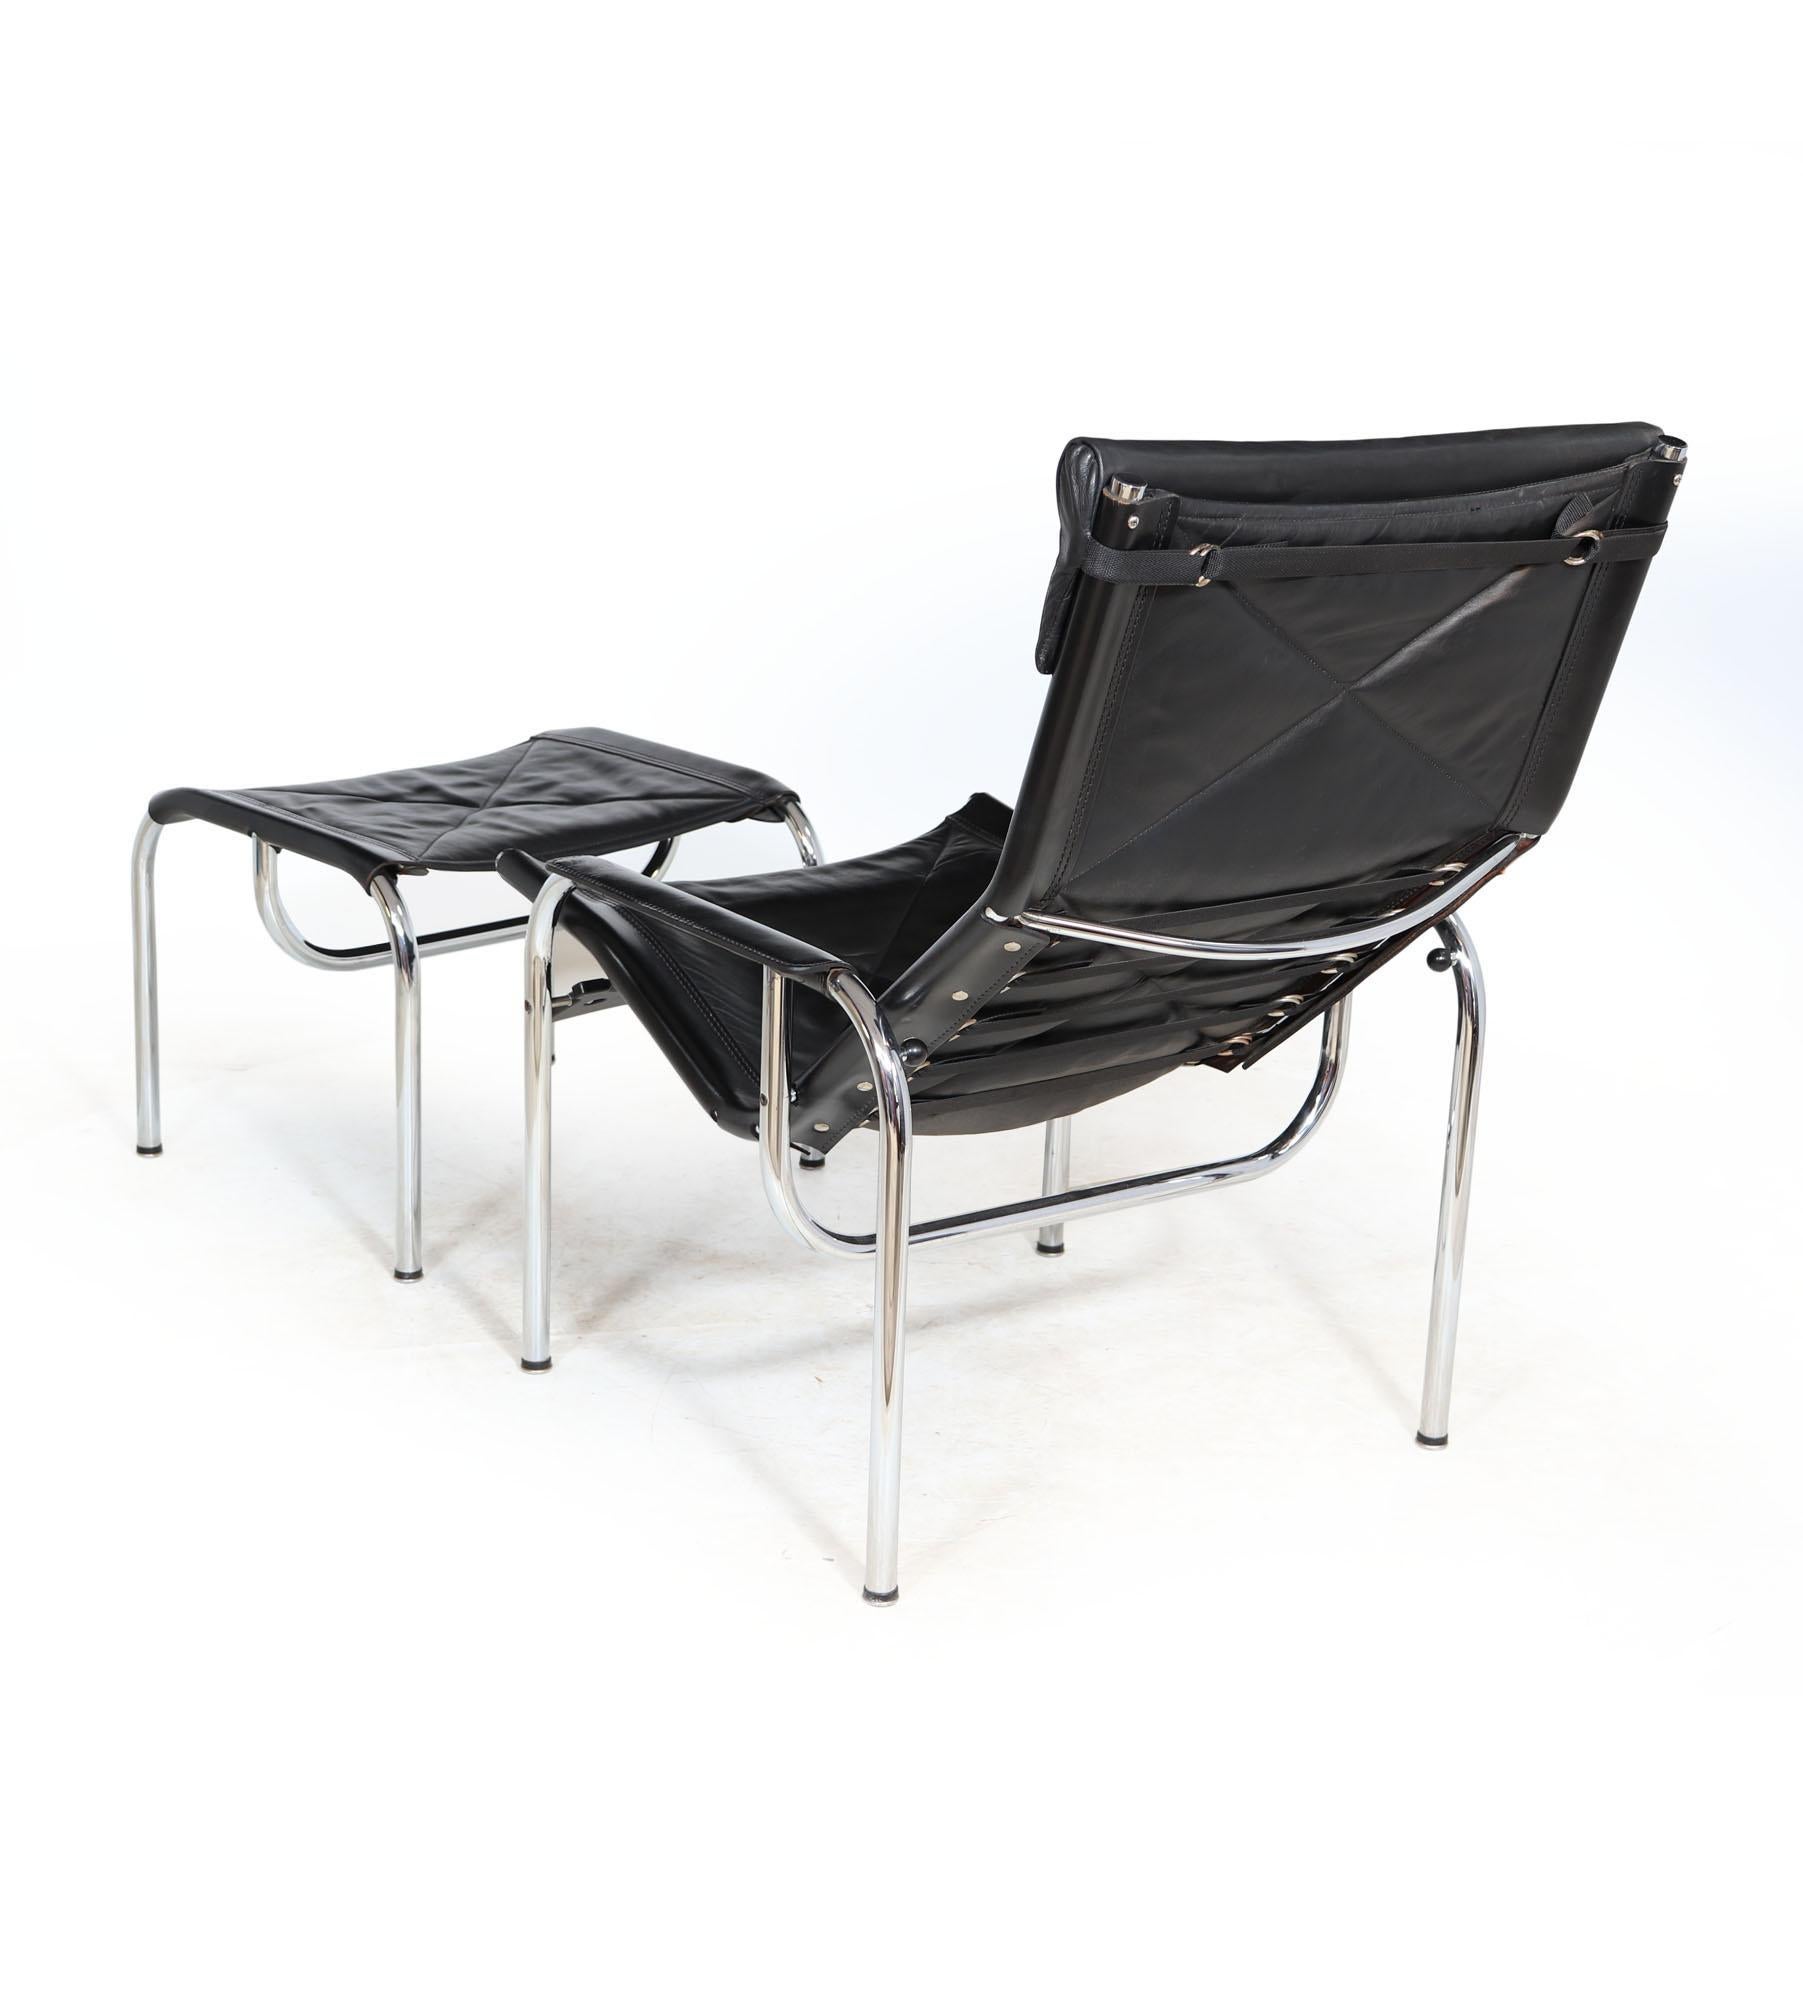 An Armchair and foot stool set designed by Hans Eichenberger and produced by Swiss company Strassel, the chair reclines and fixes into reclined position, with tubular chromed steel frame and thick leather upholstery the chair is in excellent